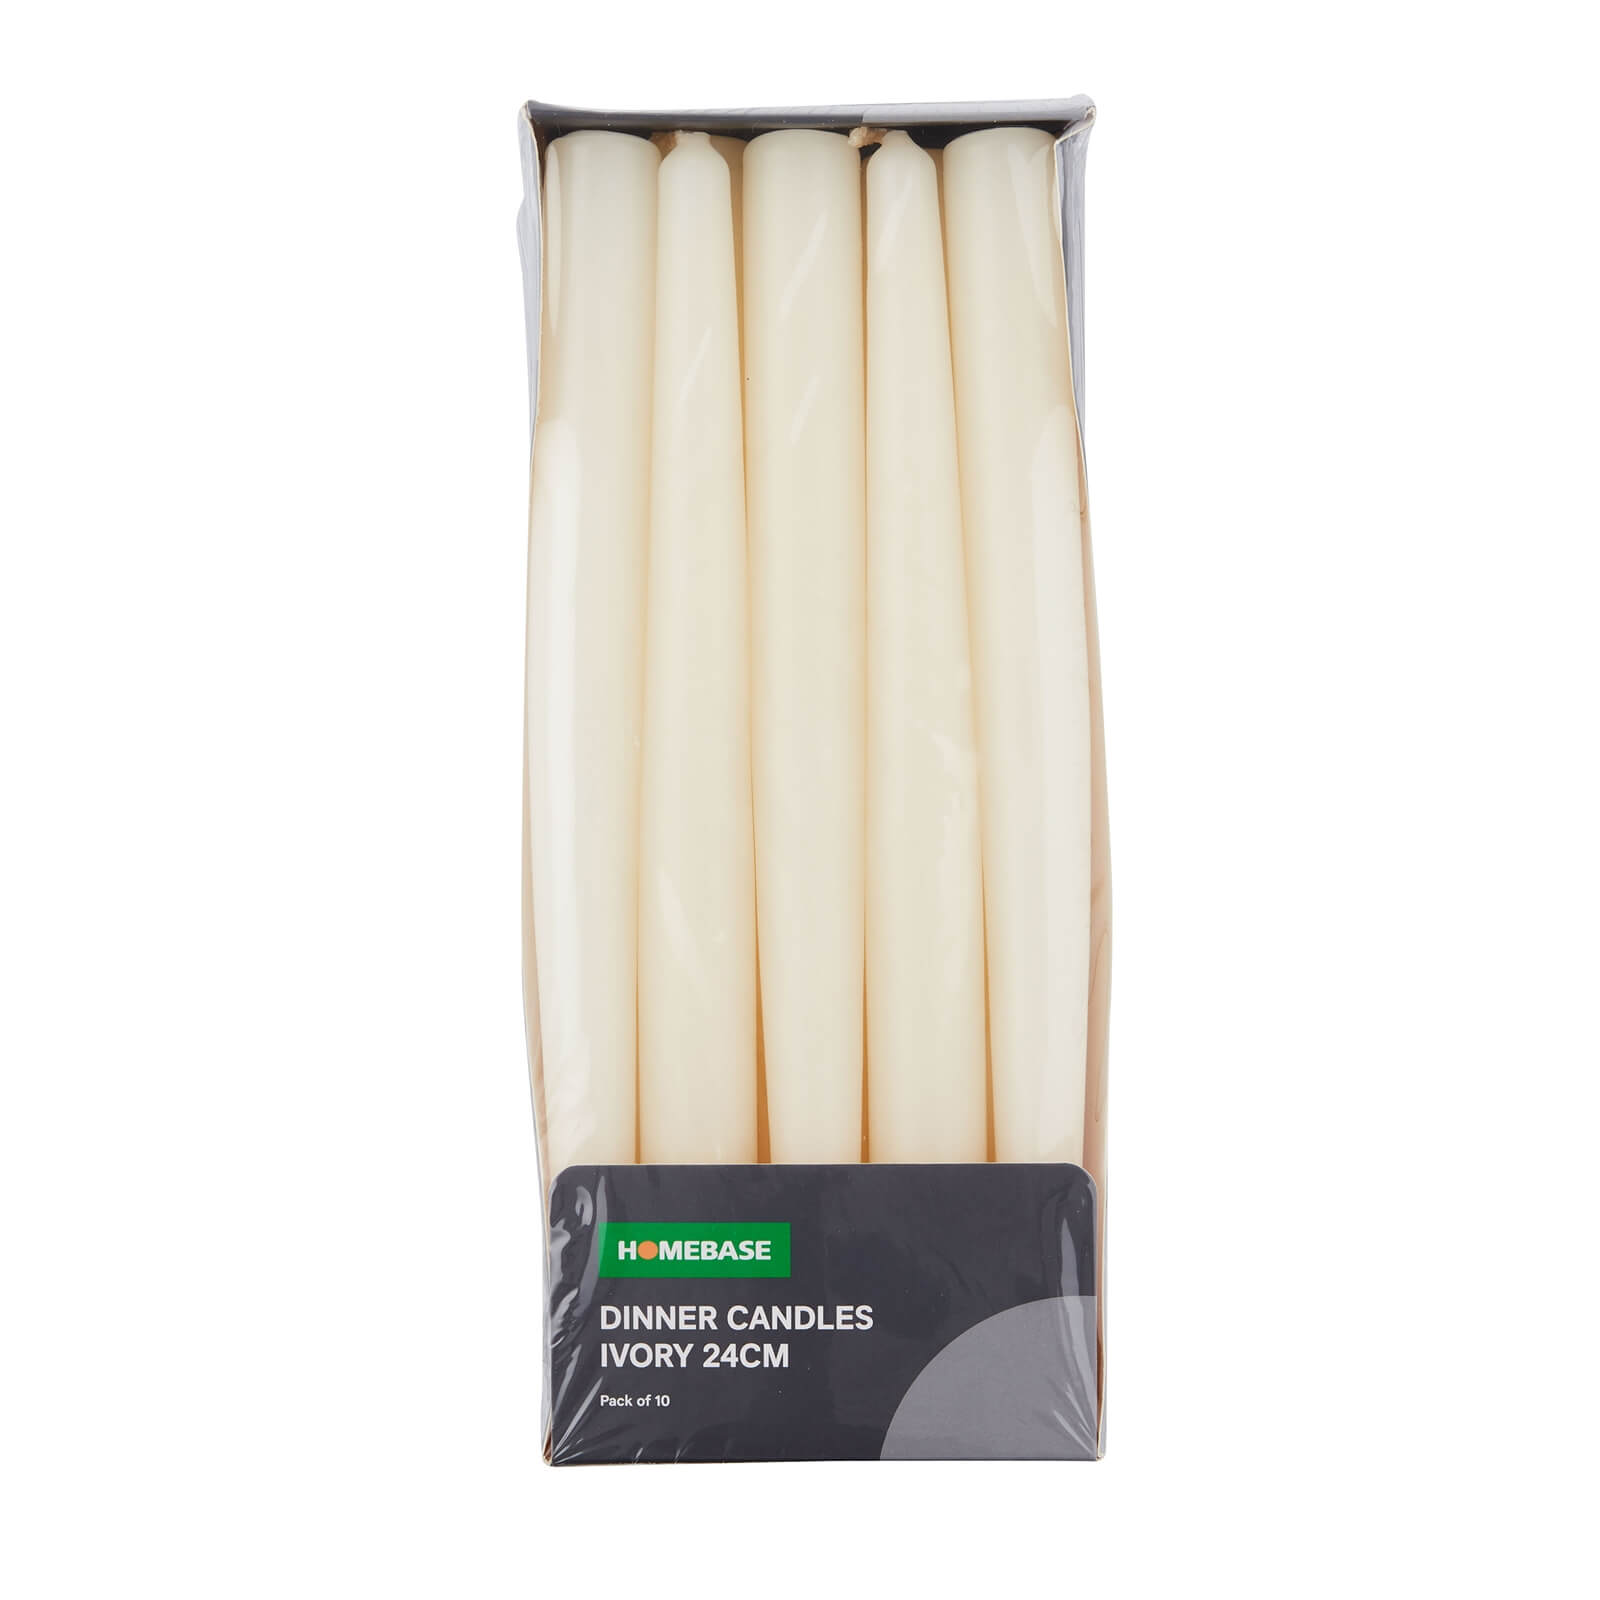 Pack of 10 Dinner Candles - Ivory - 24cm